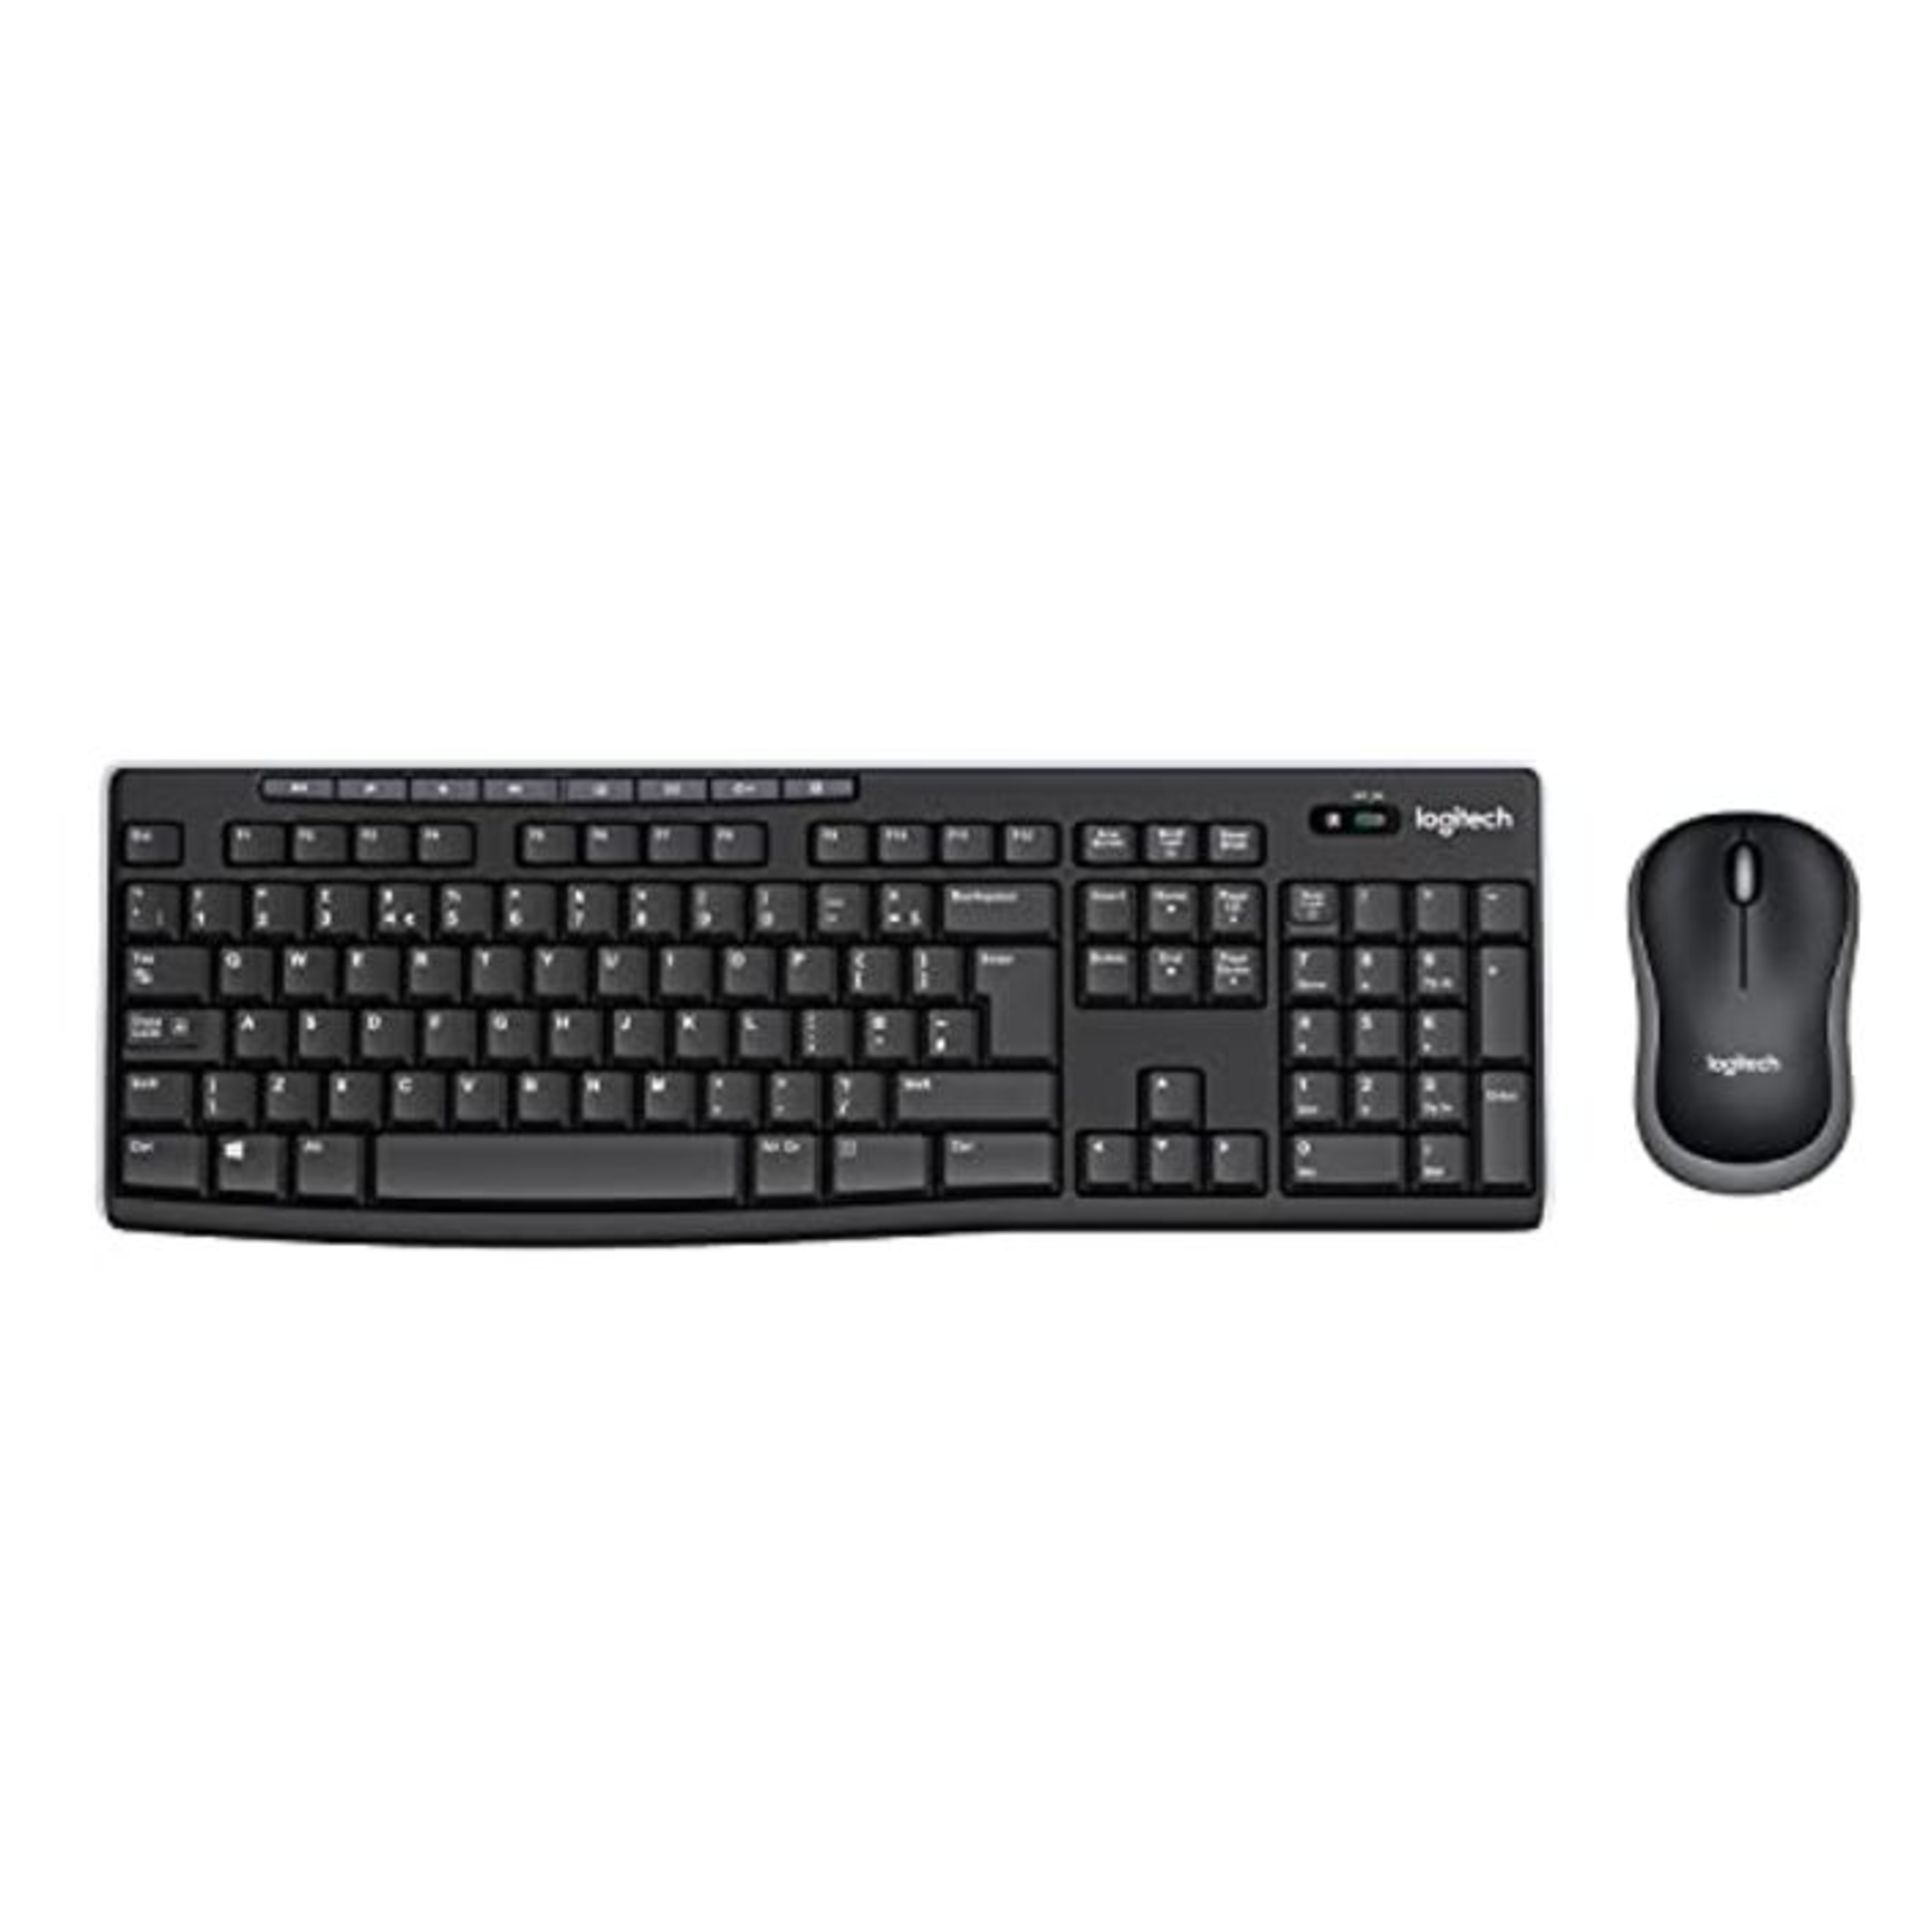 Logitech MK270 Wireless Keyboard and Mouse Combo for Windows, 2.4 GHz Wireless, Compac